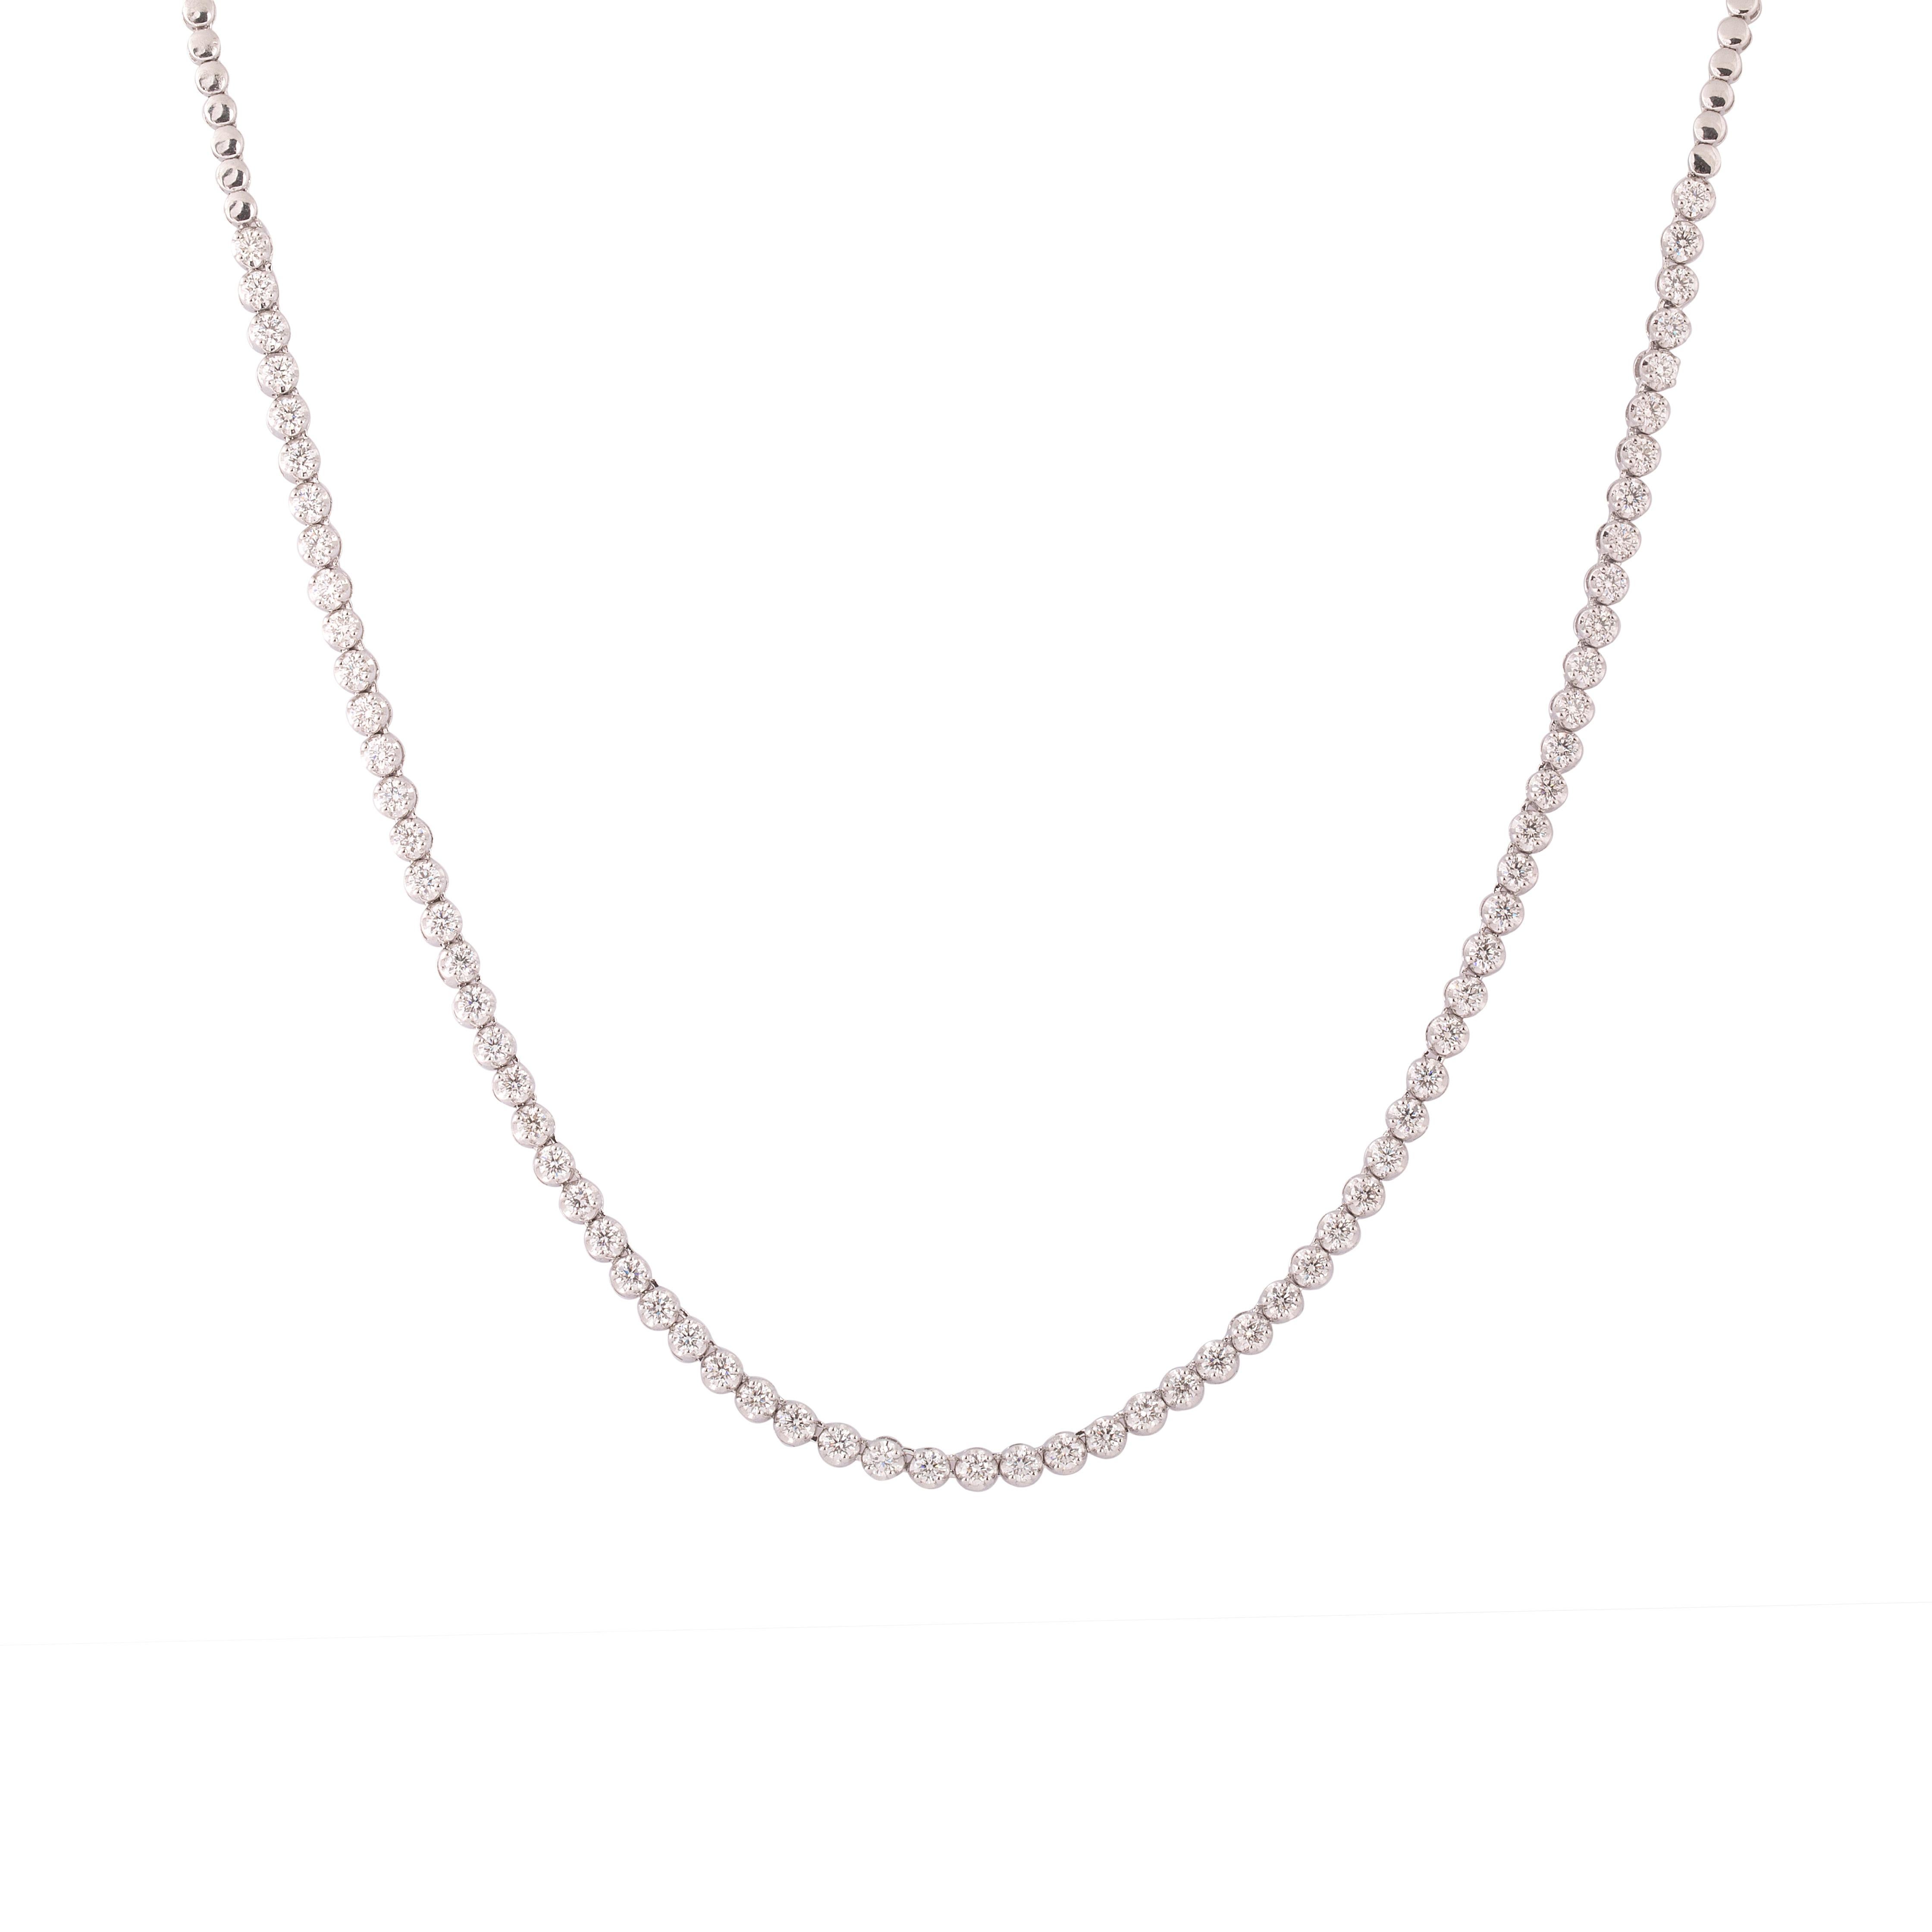 Crafted in 26.46 grams of 14-karat White Gold, The Gitcha Necklace and Earrings Jewelry Set contains 67 Stones of Round Diamonds with a total of 2.46-Carats in F-G Color and VVS-VS Clarity. The Necklace is 17-inch in Length.

CONTEMPORARY AND